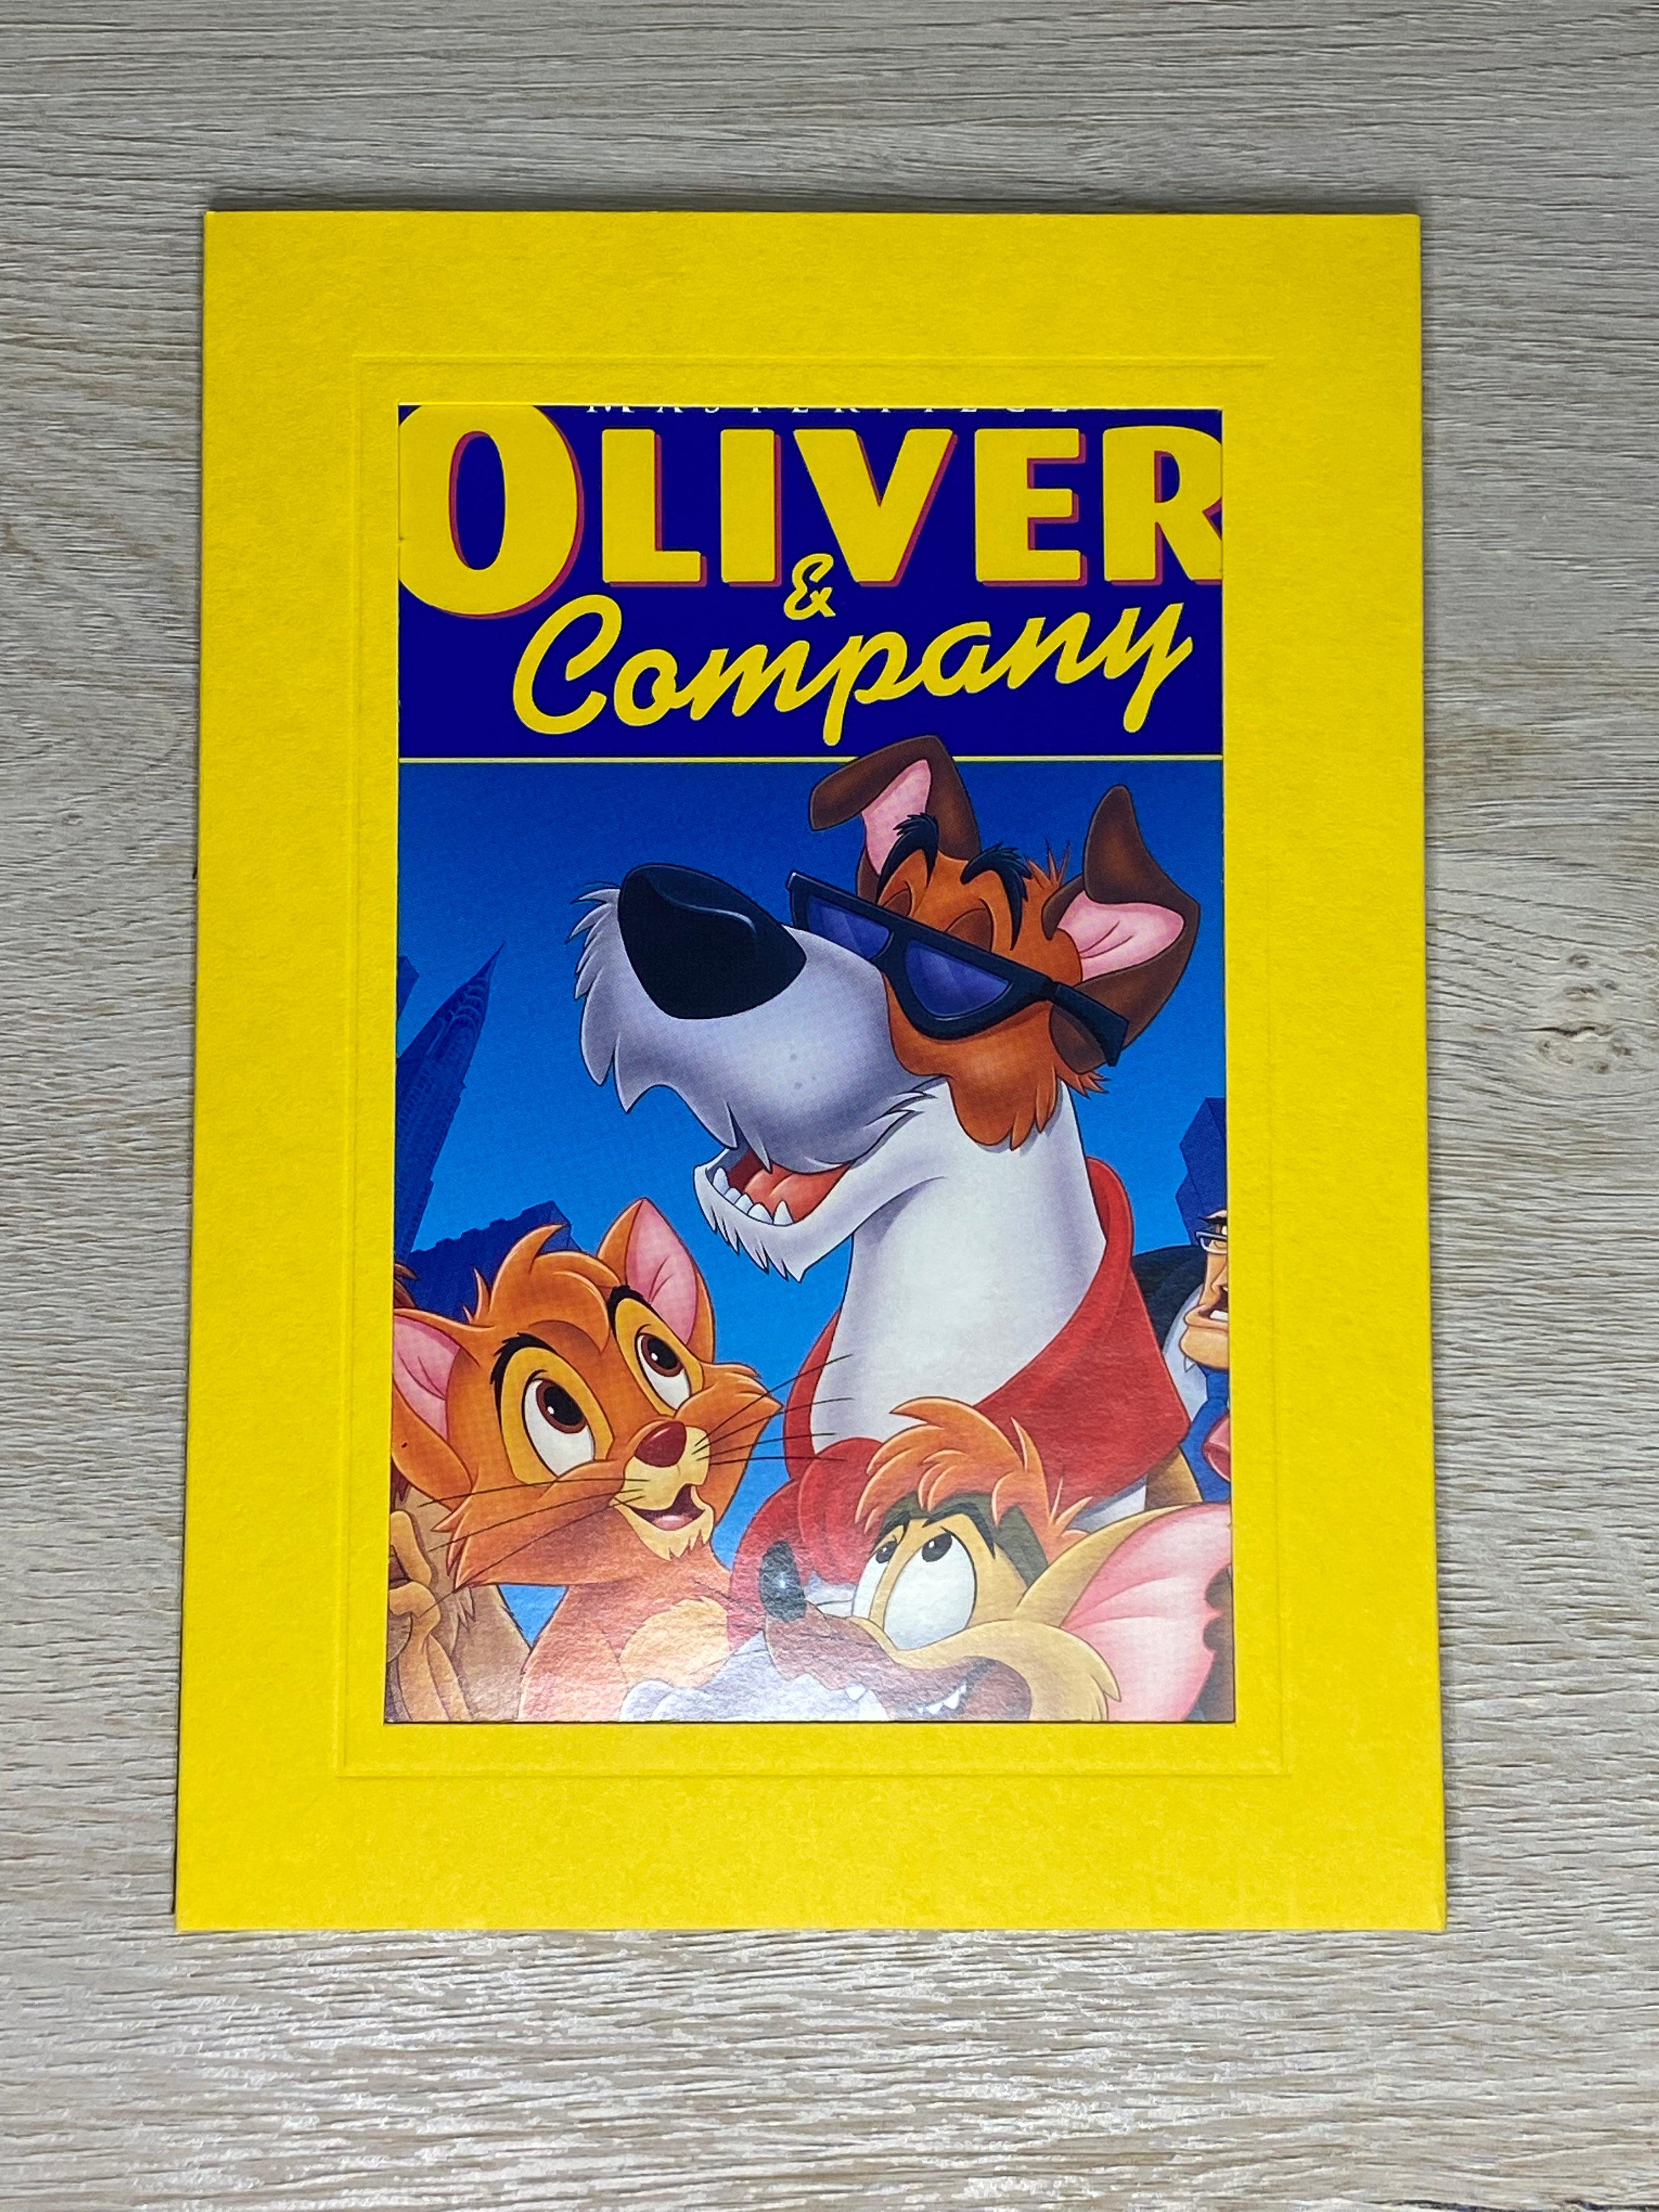 Oliver and Company by Walt Disney